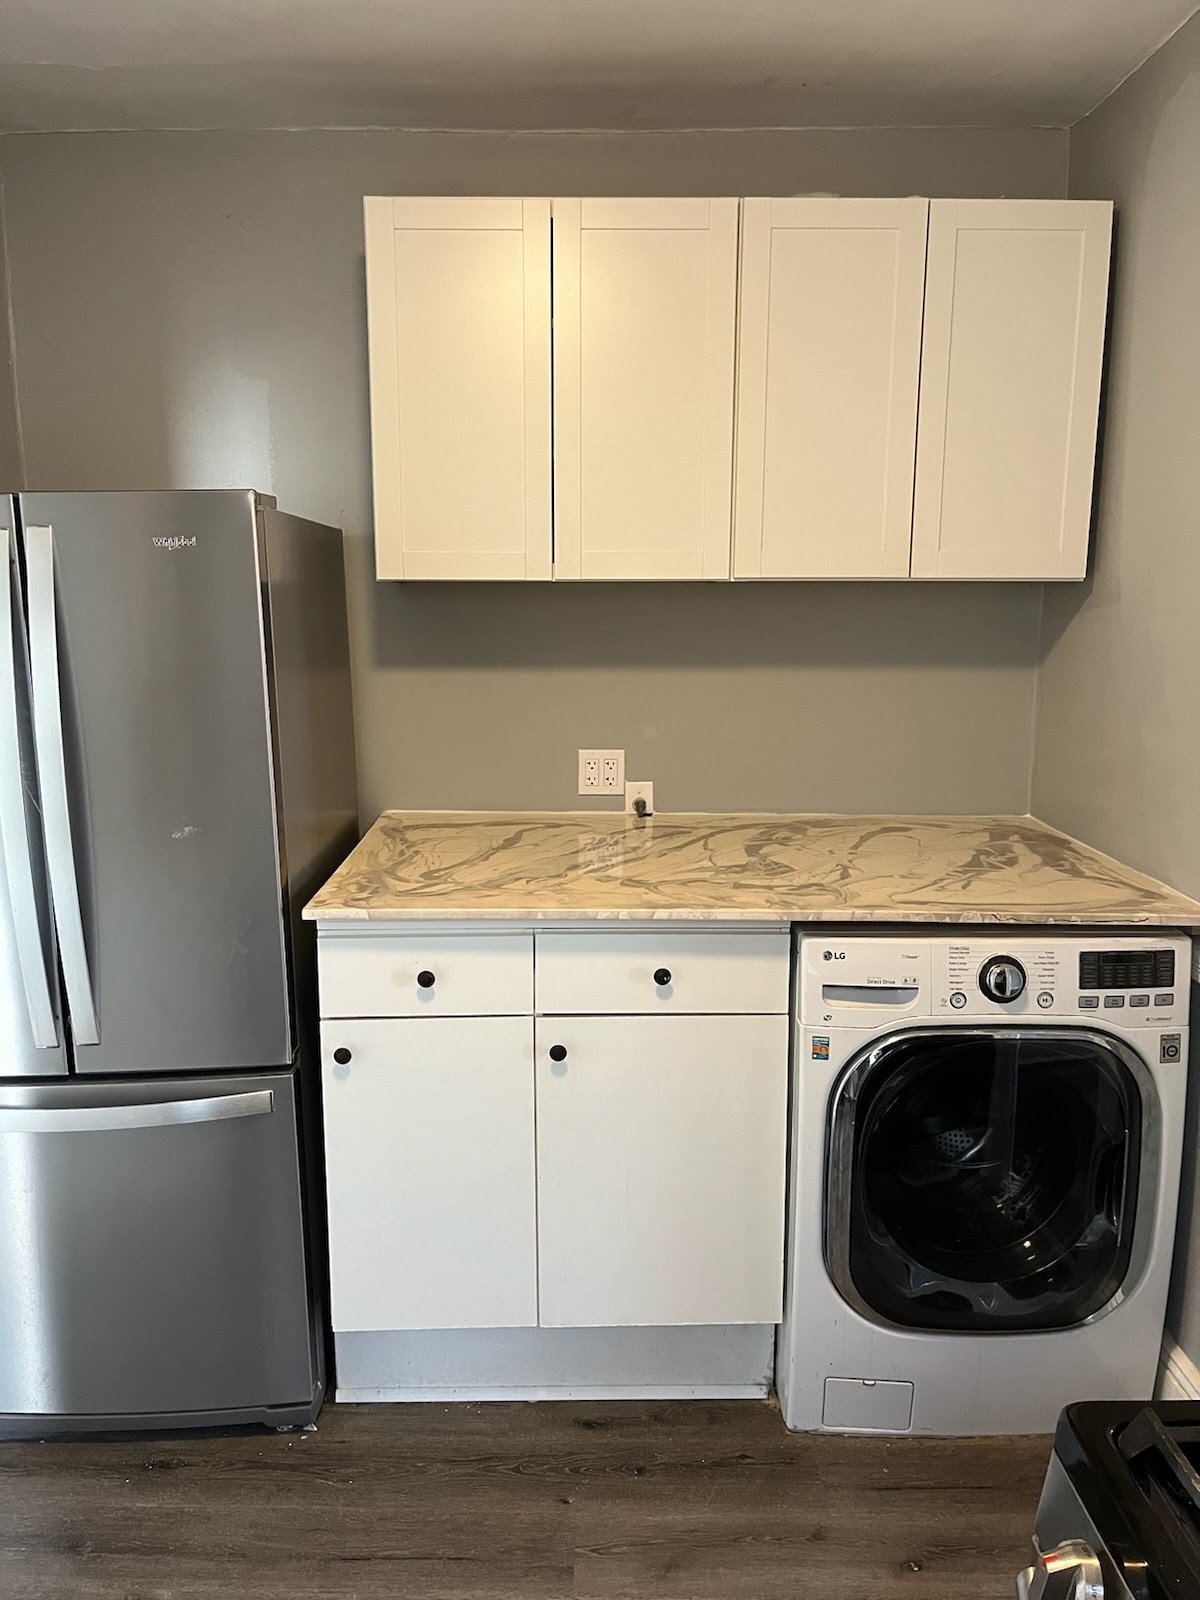 Discover contemporary living in this stylish 2-bedroom, 1-bathroom apartment located above a charming barber shop on Jericho Turnpike. Featuring a washer dryer combo, newly painted walls, and a modern kitchen plank floor, this apartment offers convenience and comfort.

Key Features:
🛏️ 2 Bedrooms
🛁 1 Bathroom
🧼 Newly Painted & Very Clean
🚗 Parking Available in Municipal Lot
🚉 Minutes from LIRR to Manhattan
🍽️ Walk to Great Restaurants & Shopping
🏫 New Hyde Park School District
🌊 Water Included; Gas & Electric Not

Enjoy privacy with a buzzer entry system.

Available Immediately.
First month's rent, security deposit, and broker's fee required. Lease terms apply.

For privacy and security reasons, the address will be provided after completion of an appointment request form. Don't miss out on this opportunity! Contact us for a viewing today.